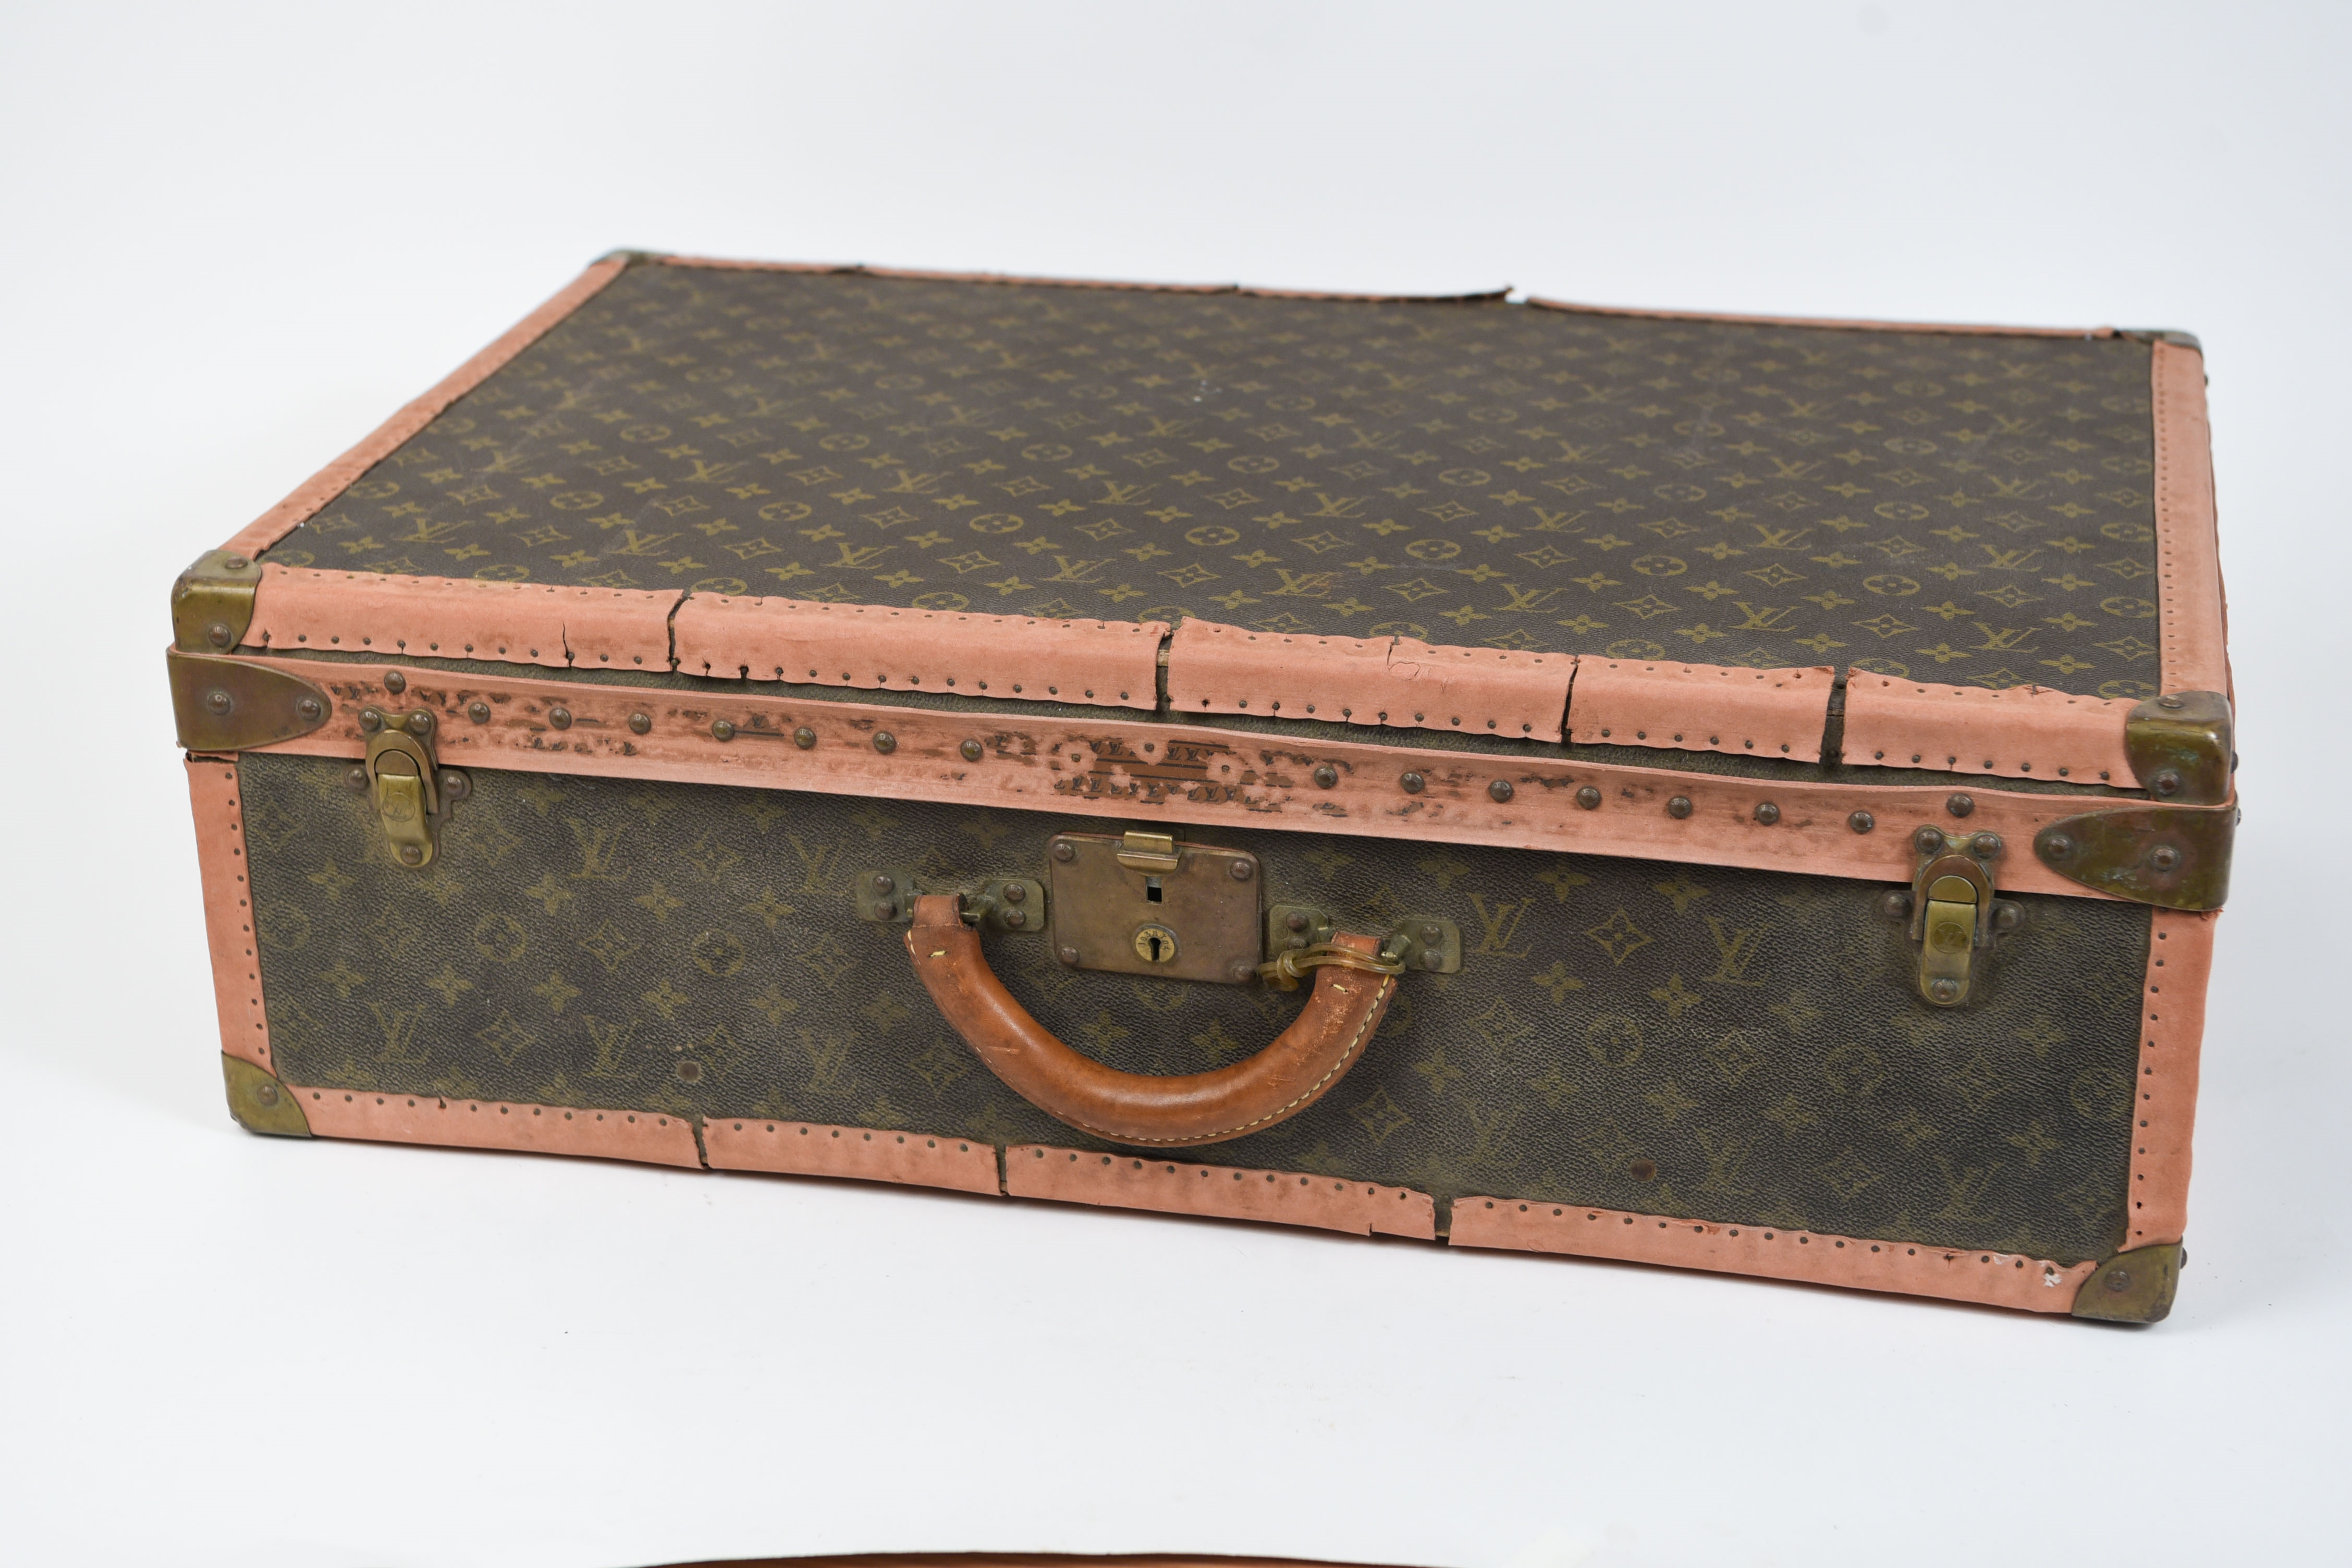 Louis Vuitton, Dimensions: (Suitcase) H 17 x W 25 Condition: Vintage wear  consistent with age and use. Wear to leather piping. Some thread loss to  straps. Some scratches and scuffs.